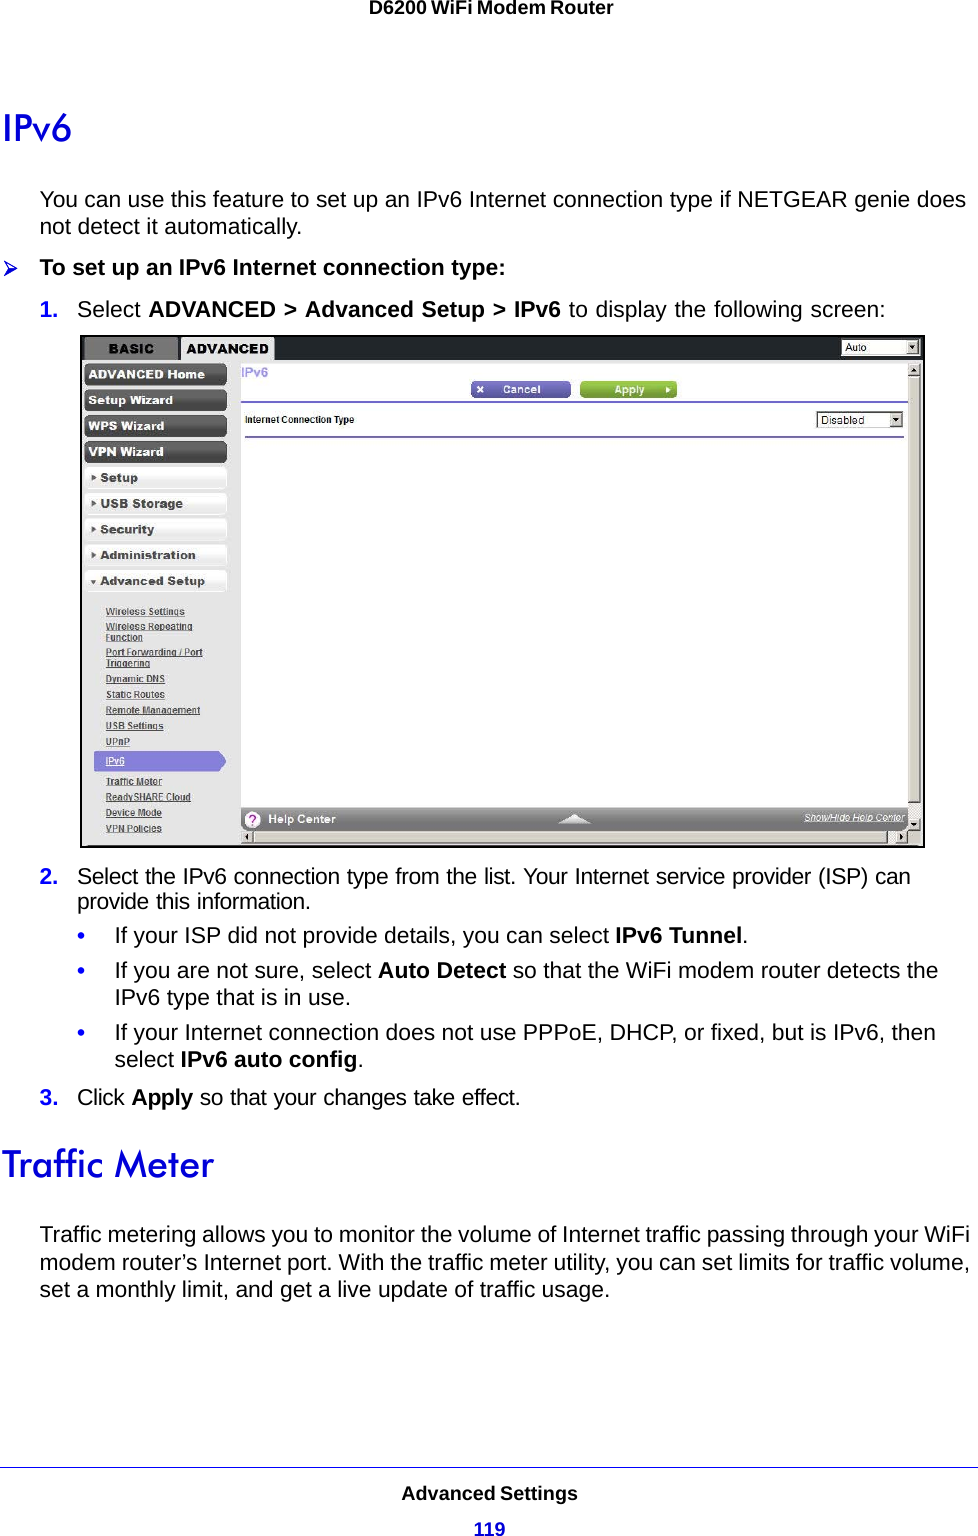 Advanced Settings119 D6200 WiFi Modem RouterIPv6You can use this feature to set up an IPv6 Internet connection type if NETGEAR genie does not detect it automatically.To set up an IPv6 Internet connection type:1. Select ADVANCED &gt; Advanced Setup &gt; IPv6 to display the following screen:2. Select the IPv6 connection type from the list. Your Internet service provider (ISP) can provide this information.•If your ISP did not provide details, you can select IPv6 Tunnel. •If you are not sure, select Auto Detect so that the WiFi modem router detects the IPv6 type that is in use.•If your Internet connection does not use PPPoE, DHCP, or fixed, but is IPv6, then select IPv6 auto config.3. Click Apply so that your changes take effect.Traffic MeterTraffic metering allows you to monitor the volume of Internet traffic passing through your WiFi modem router’s Internet port. With the traffic meter utility, you can set limits for traffic volume, set a monthly limit, and get a live update of traffic usage.